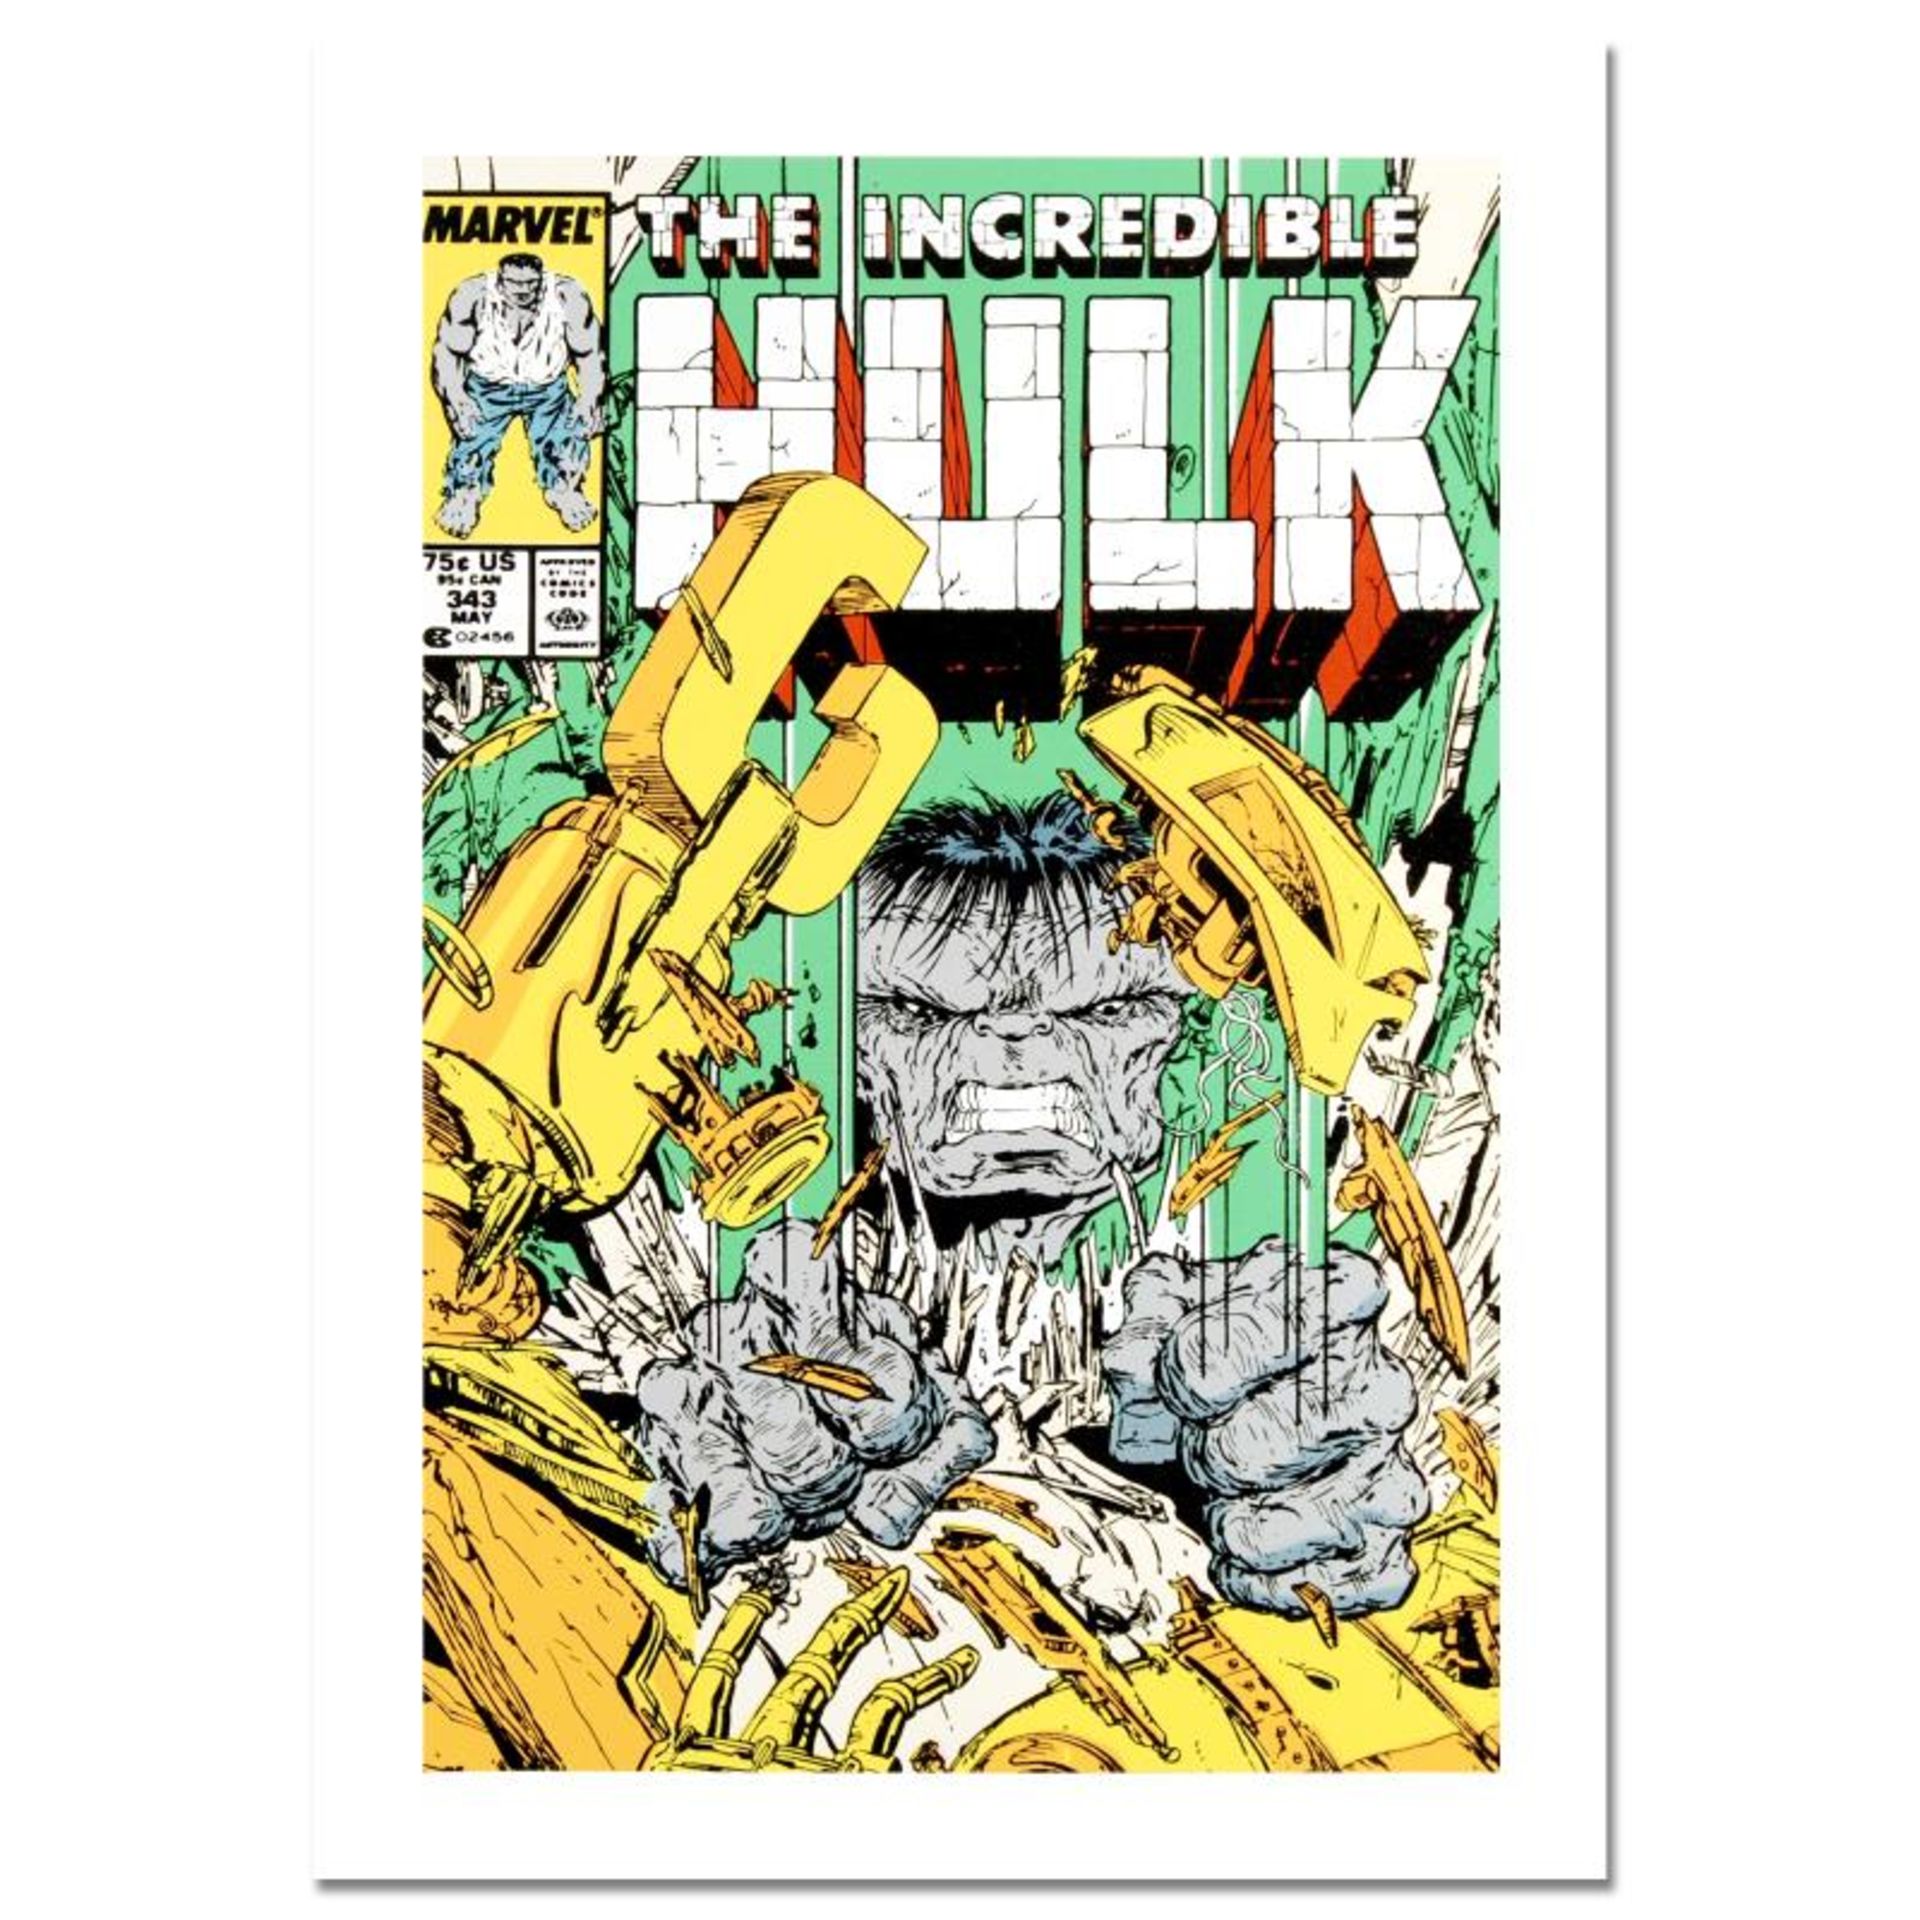 Marvel Comics, "The Incredible Hulk #343" Numbered Limited Edition Canvas by Tod